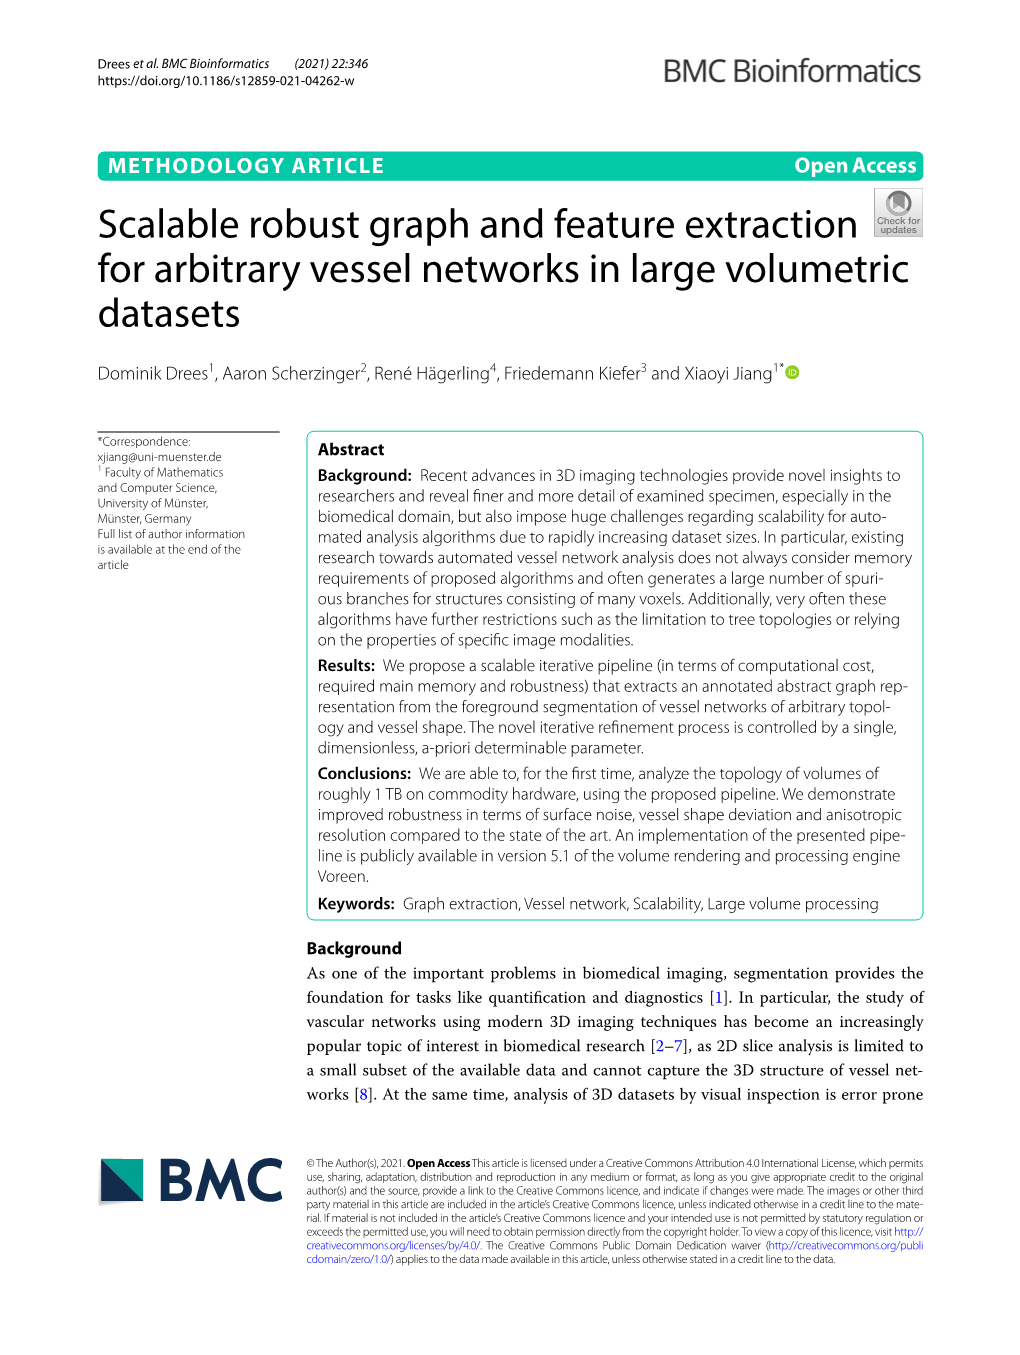 Scalable Robust Graph and Feature Extraction for Arbitrary Vessel Networks in Large Volumetric Datasets